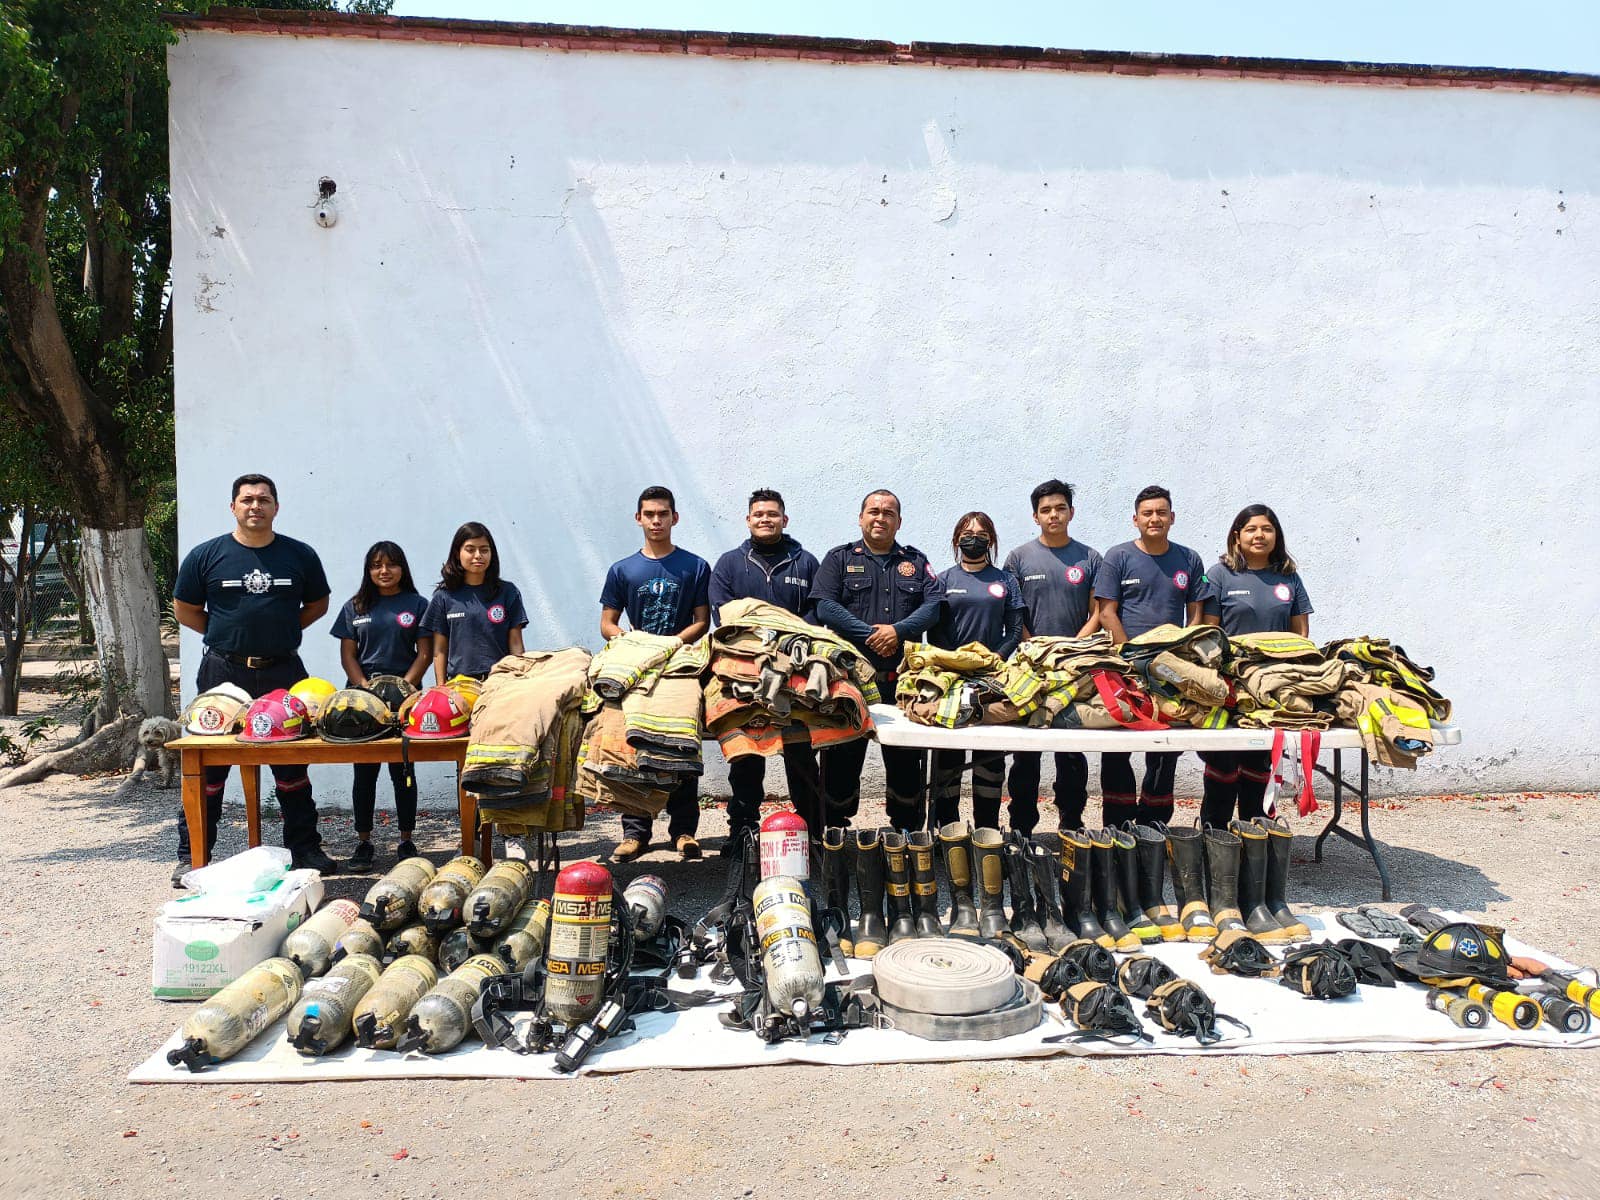 Firefighters Crossing Borders donates to Quintana Roo and Huatulco.